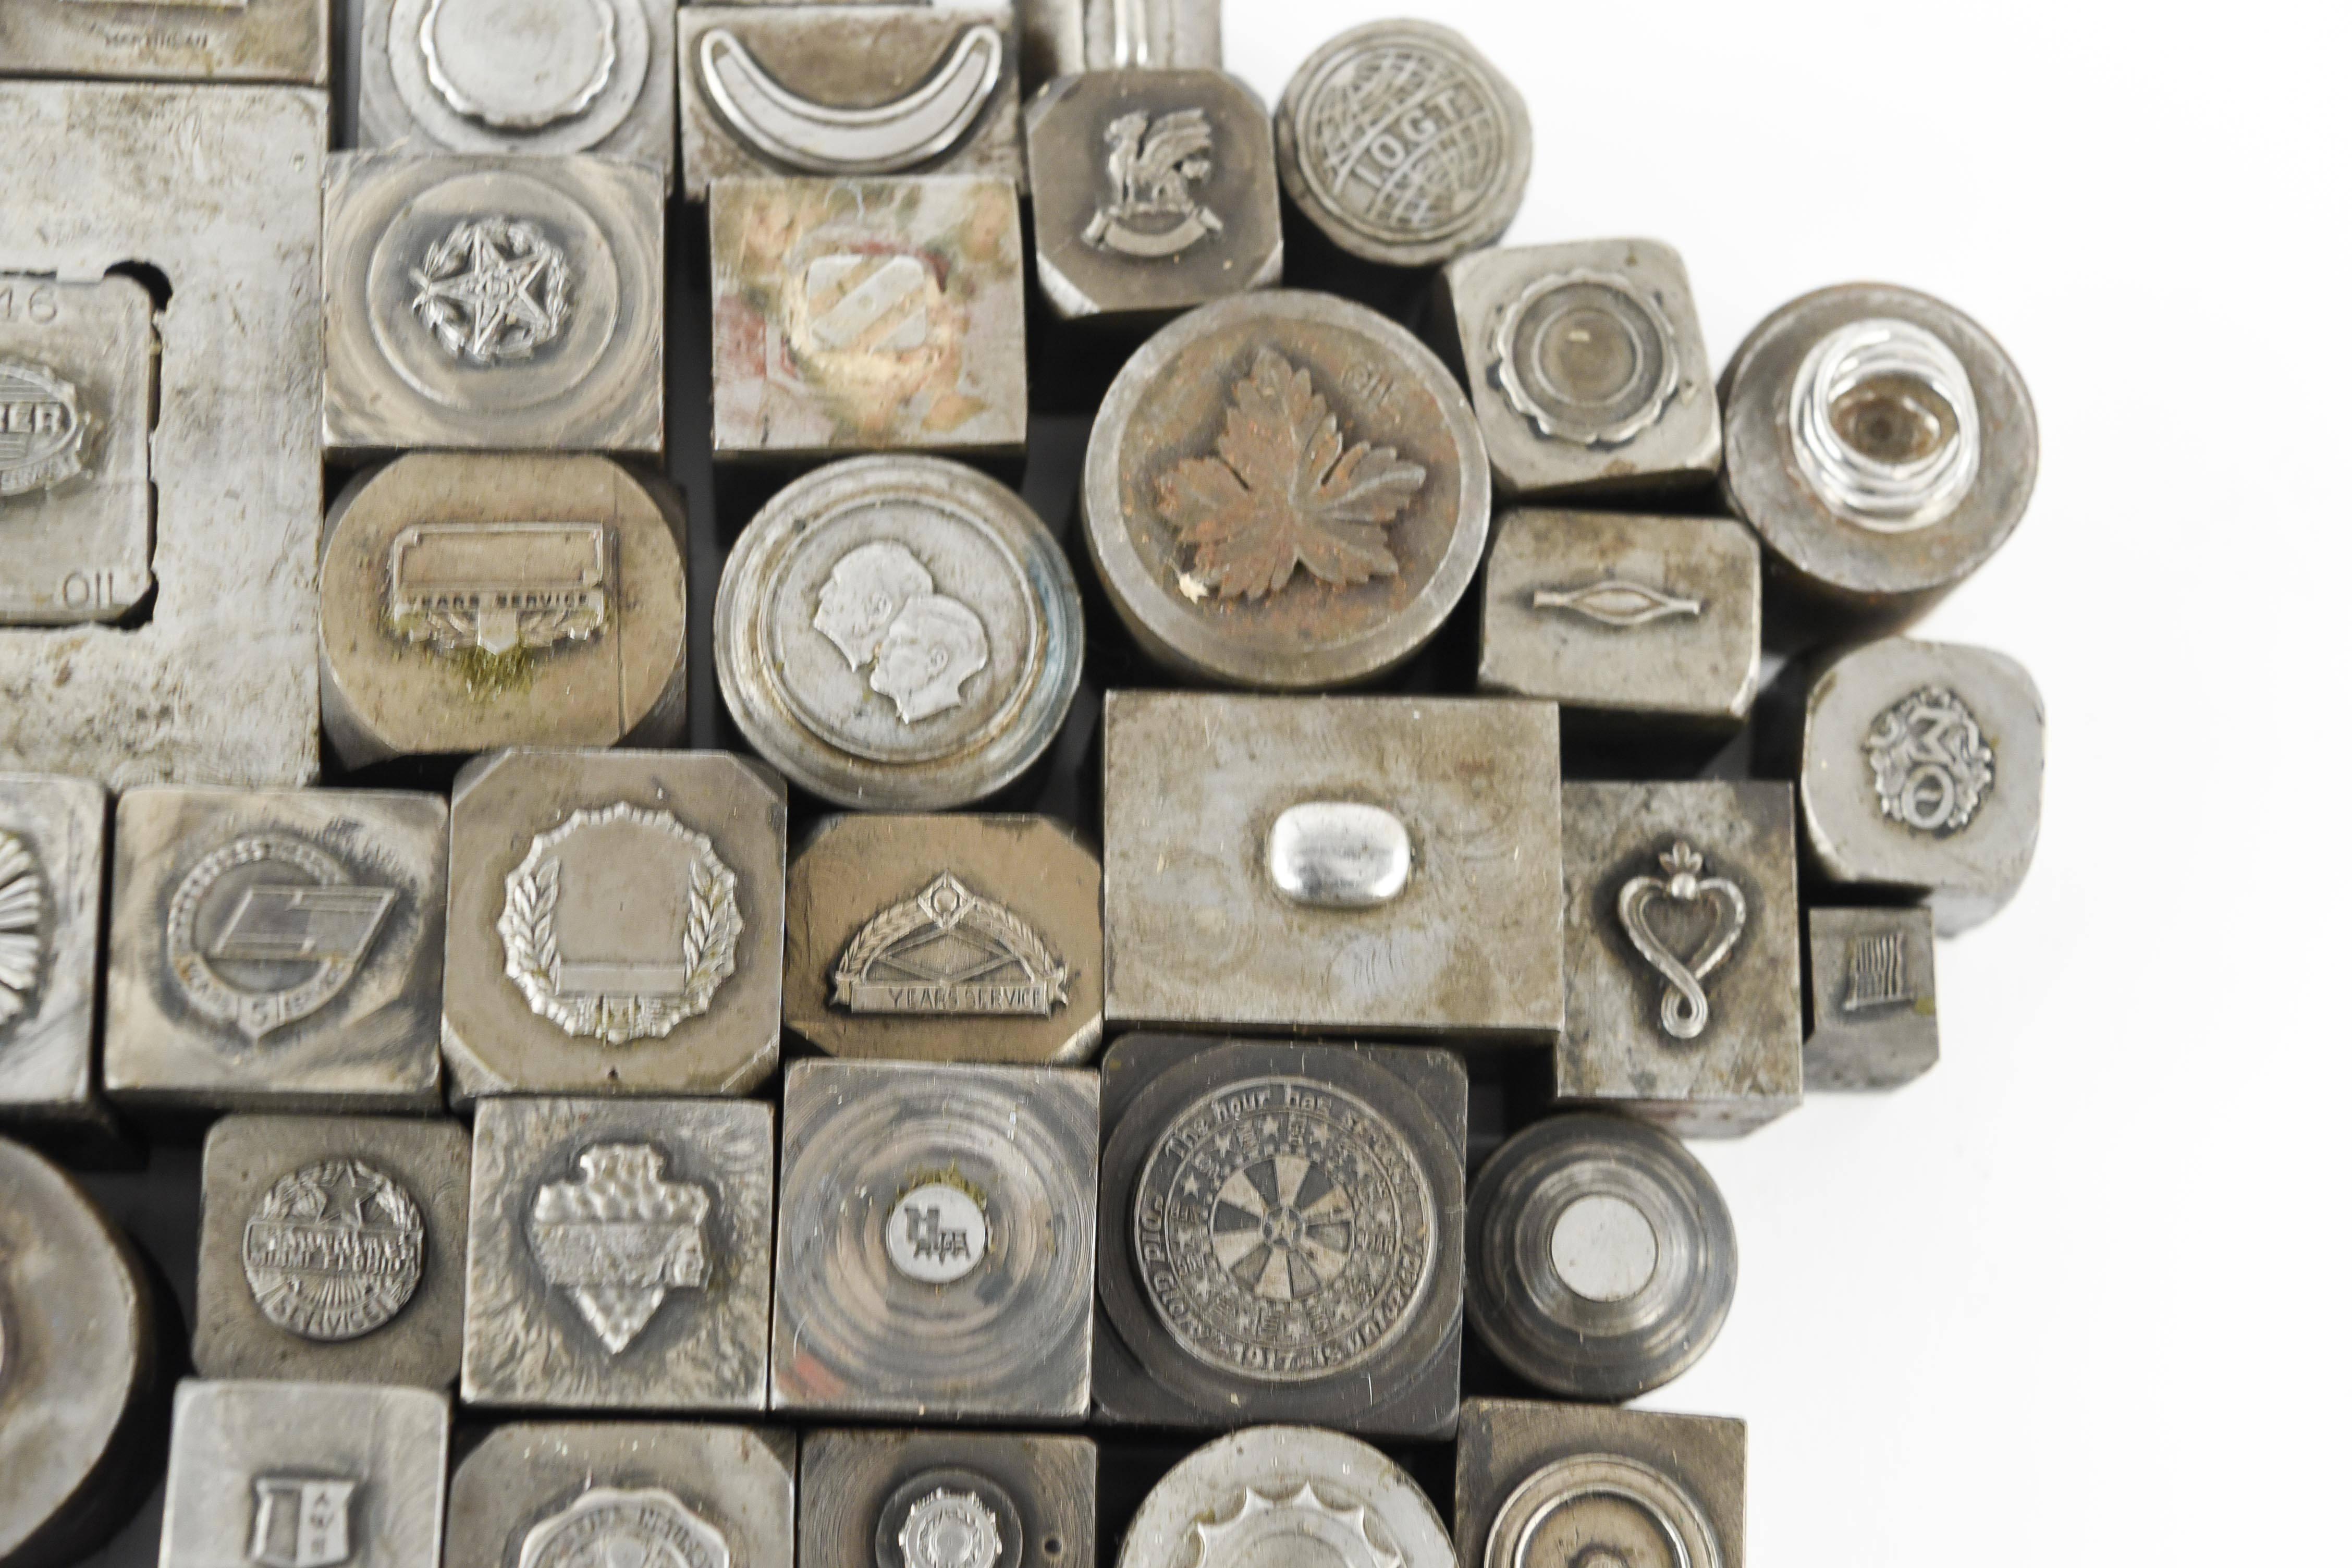 American Antique Metal Die Stamp/Seal Collection